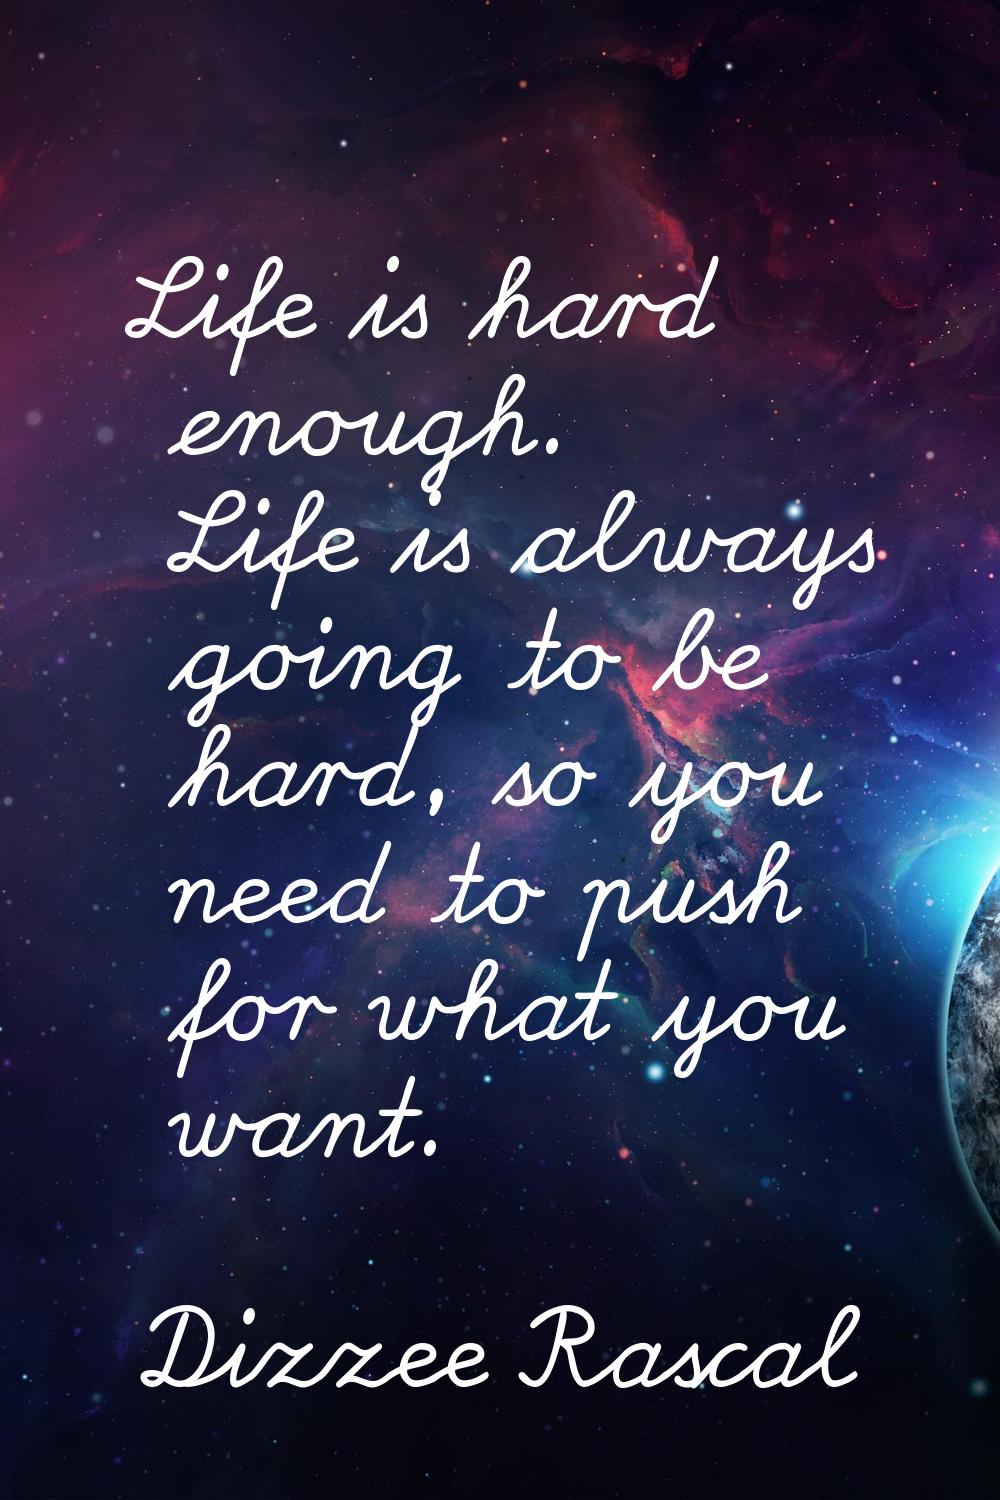 Life is hard enough. Life is always going to be hard, so you need to push for what you want.